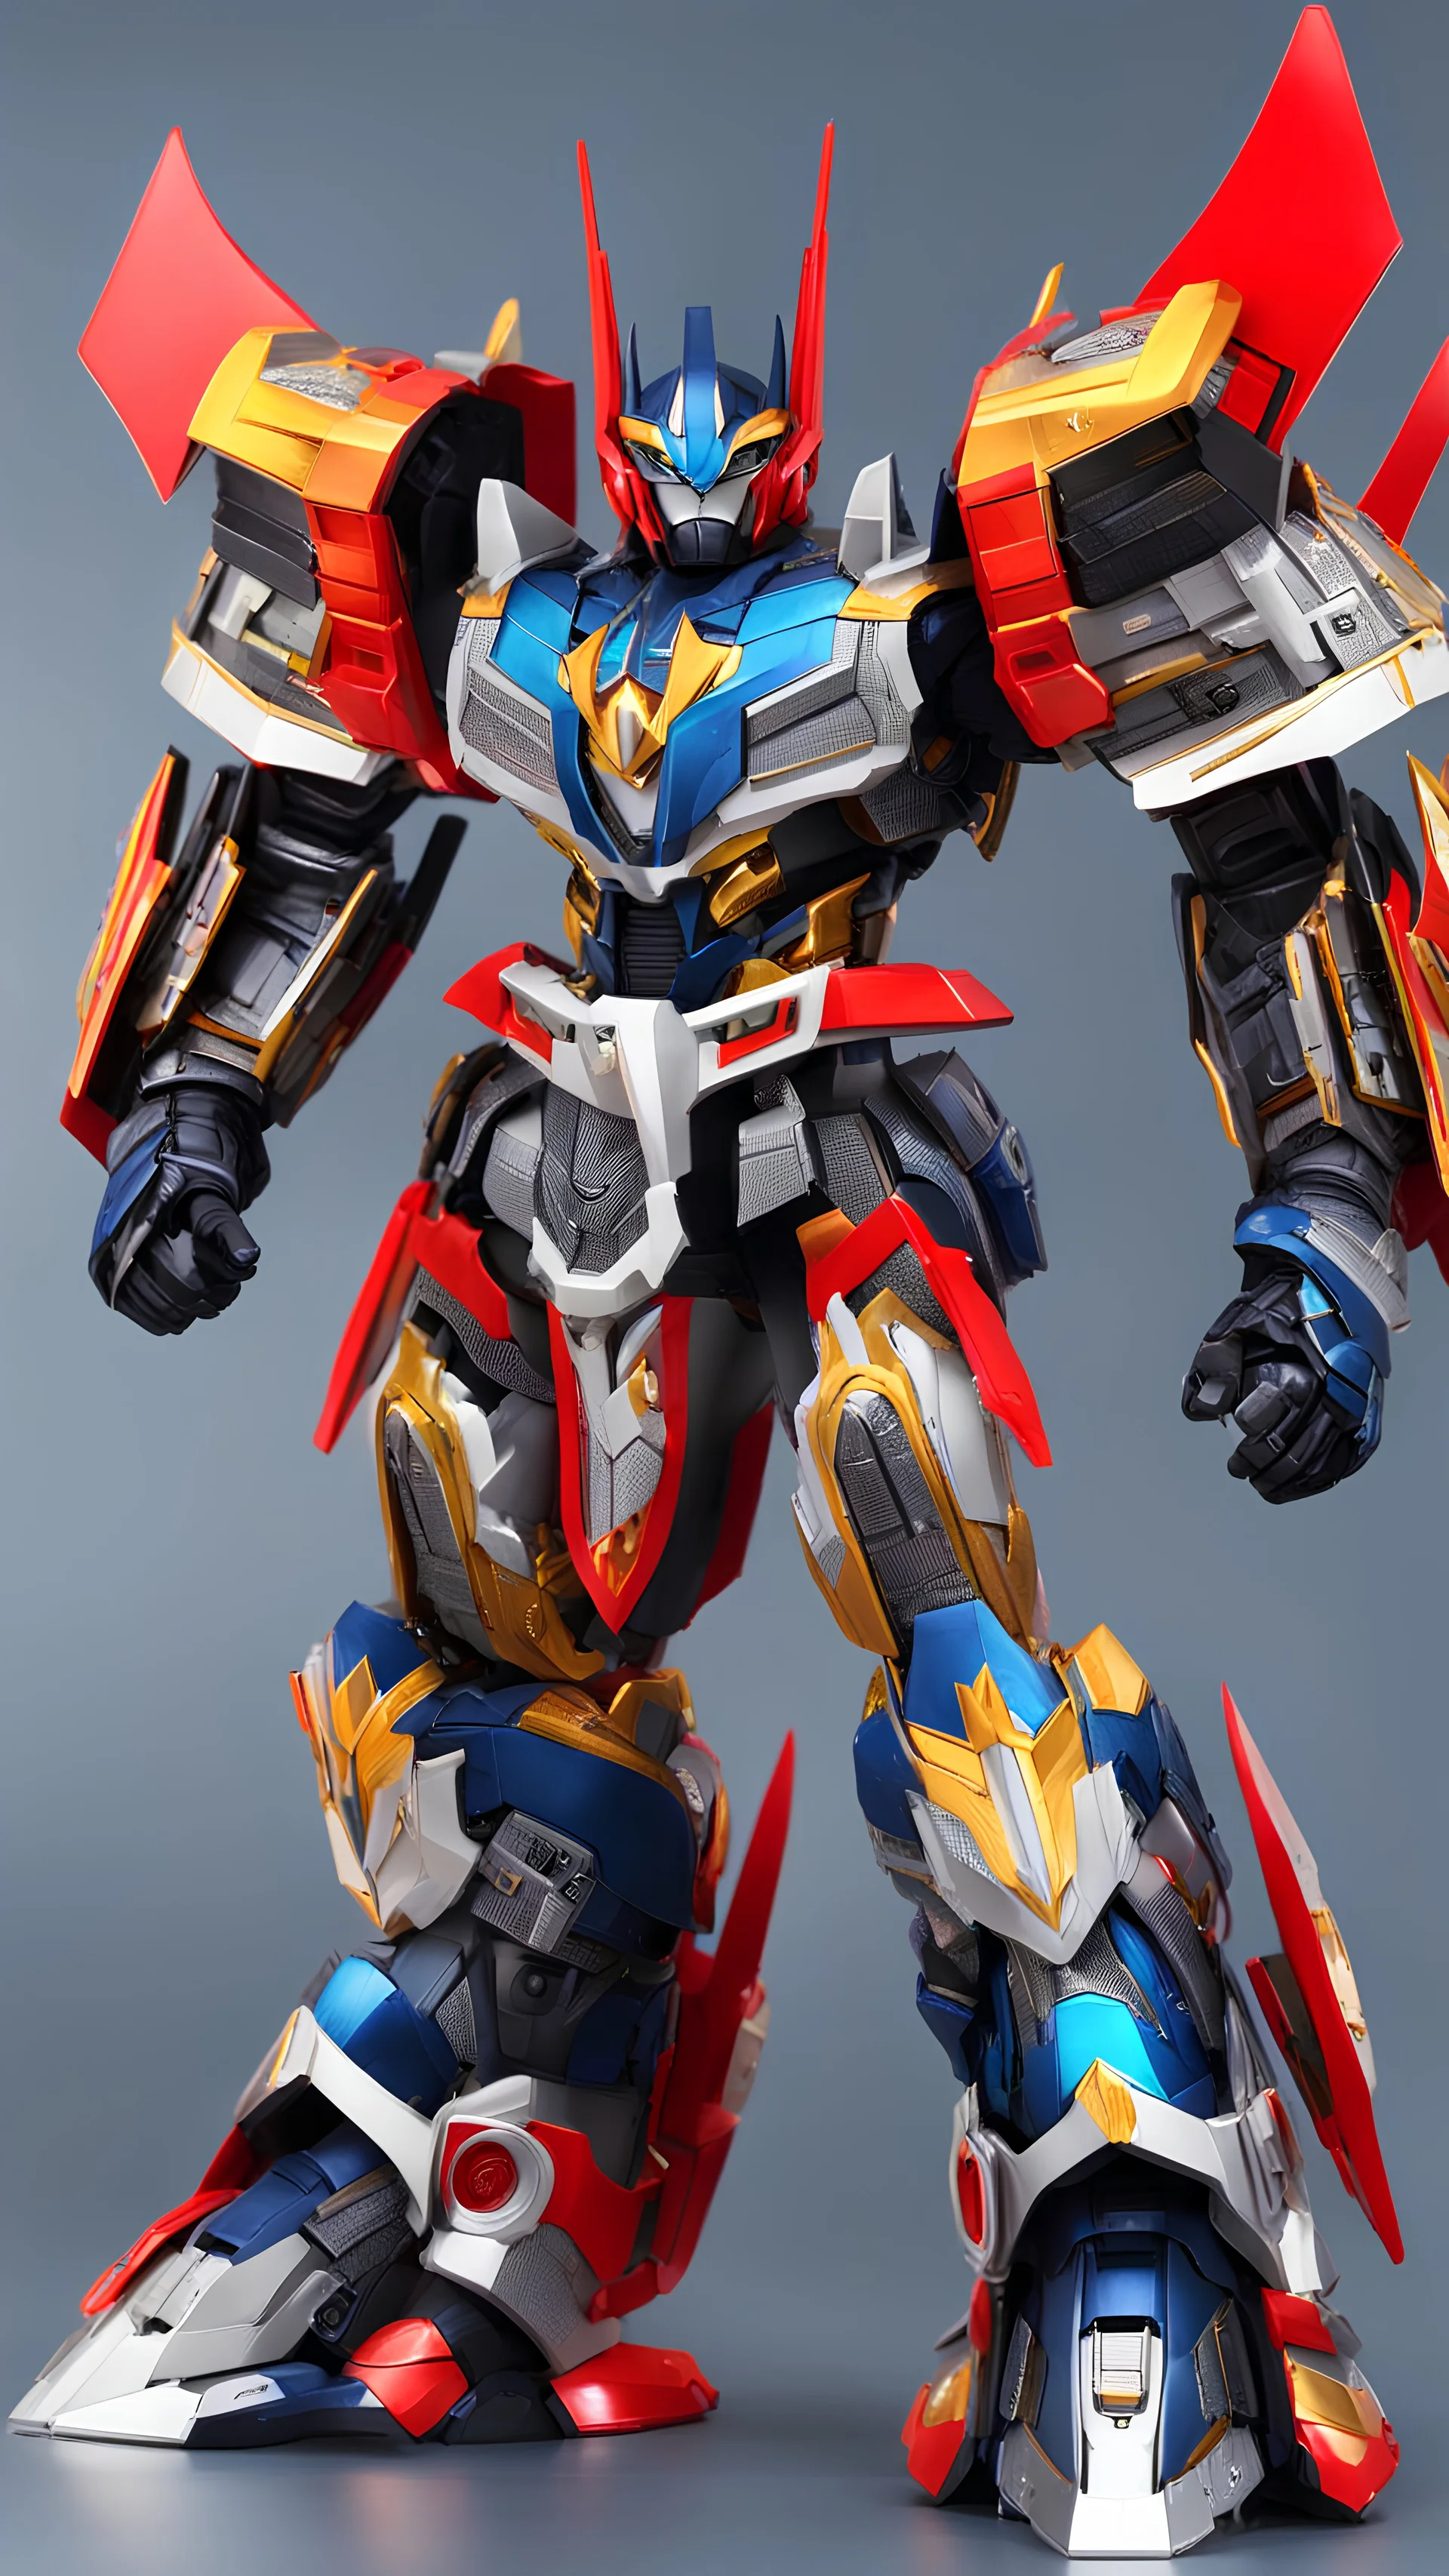 A close picture to cosmic transformers warrior, cosmic galaxy armor intricate details, highly detailed, in dreamshaper finetuned model with dynamic art style witg